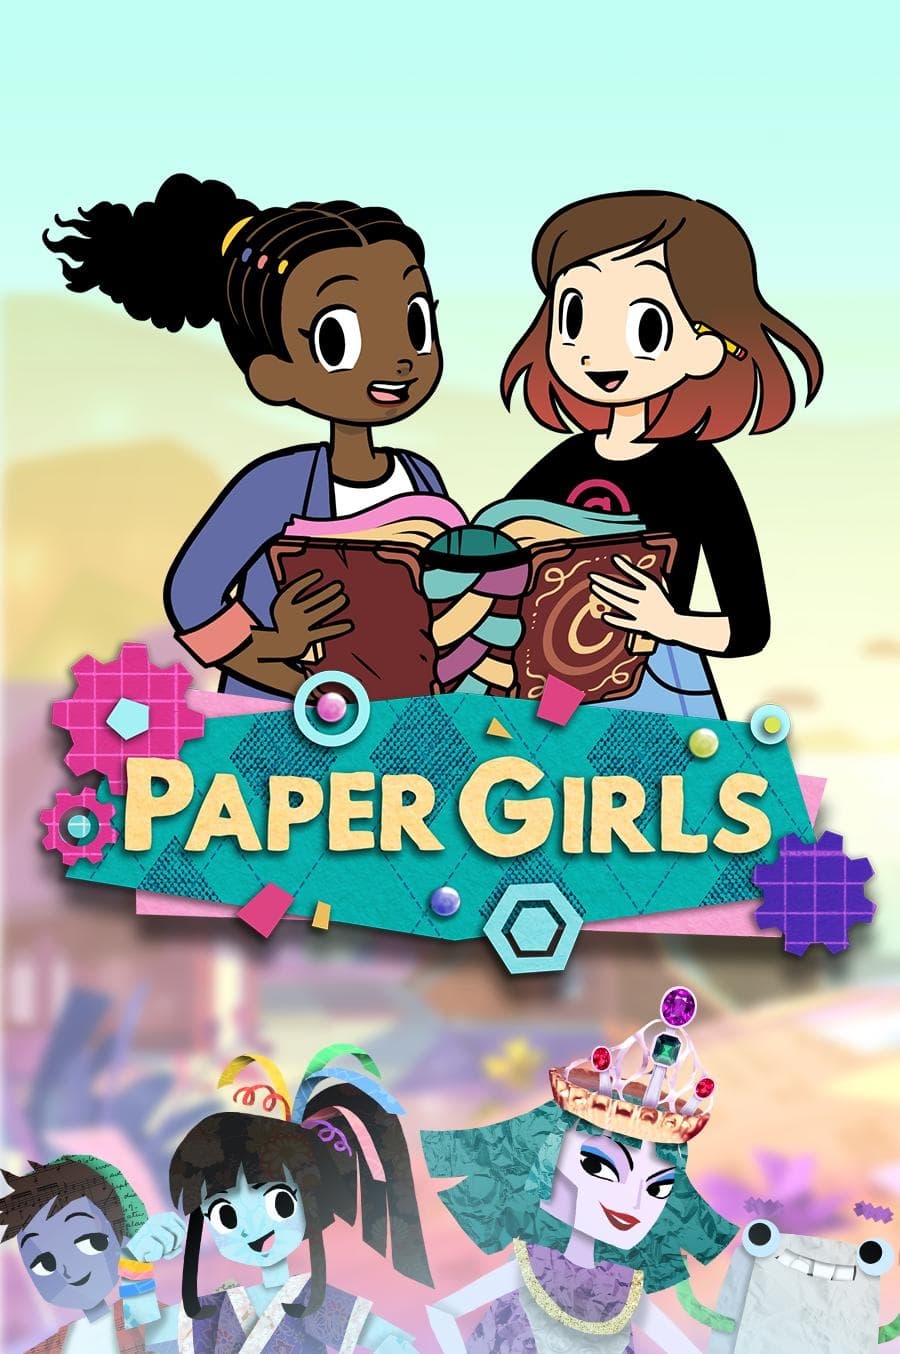 The Paper Girls Show